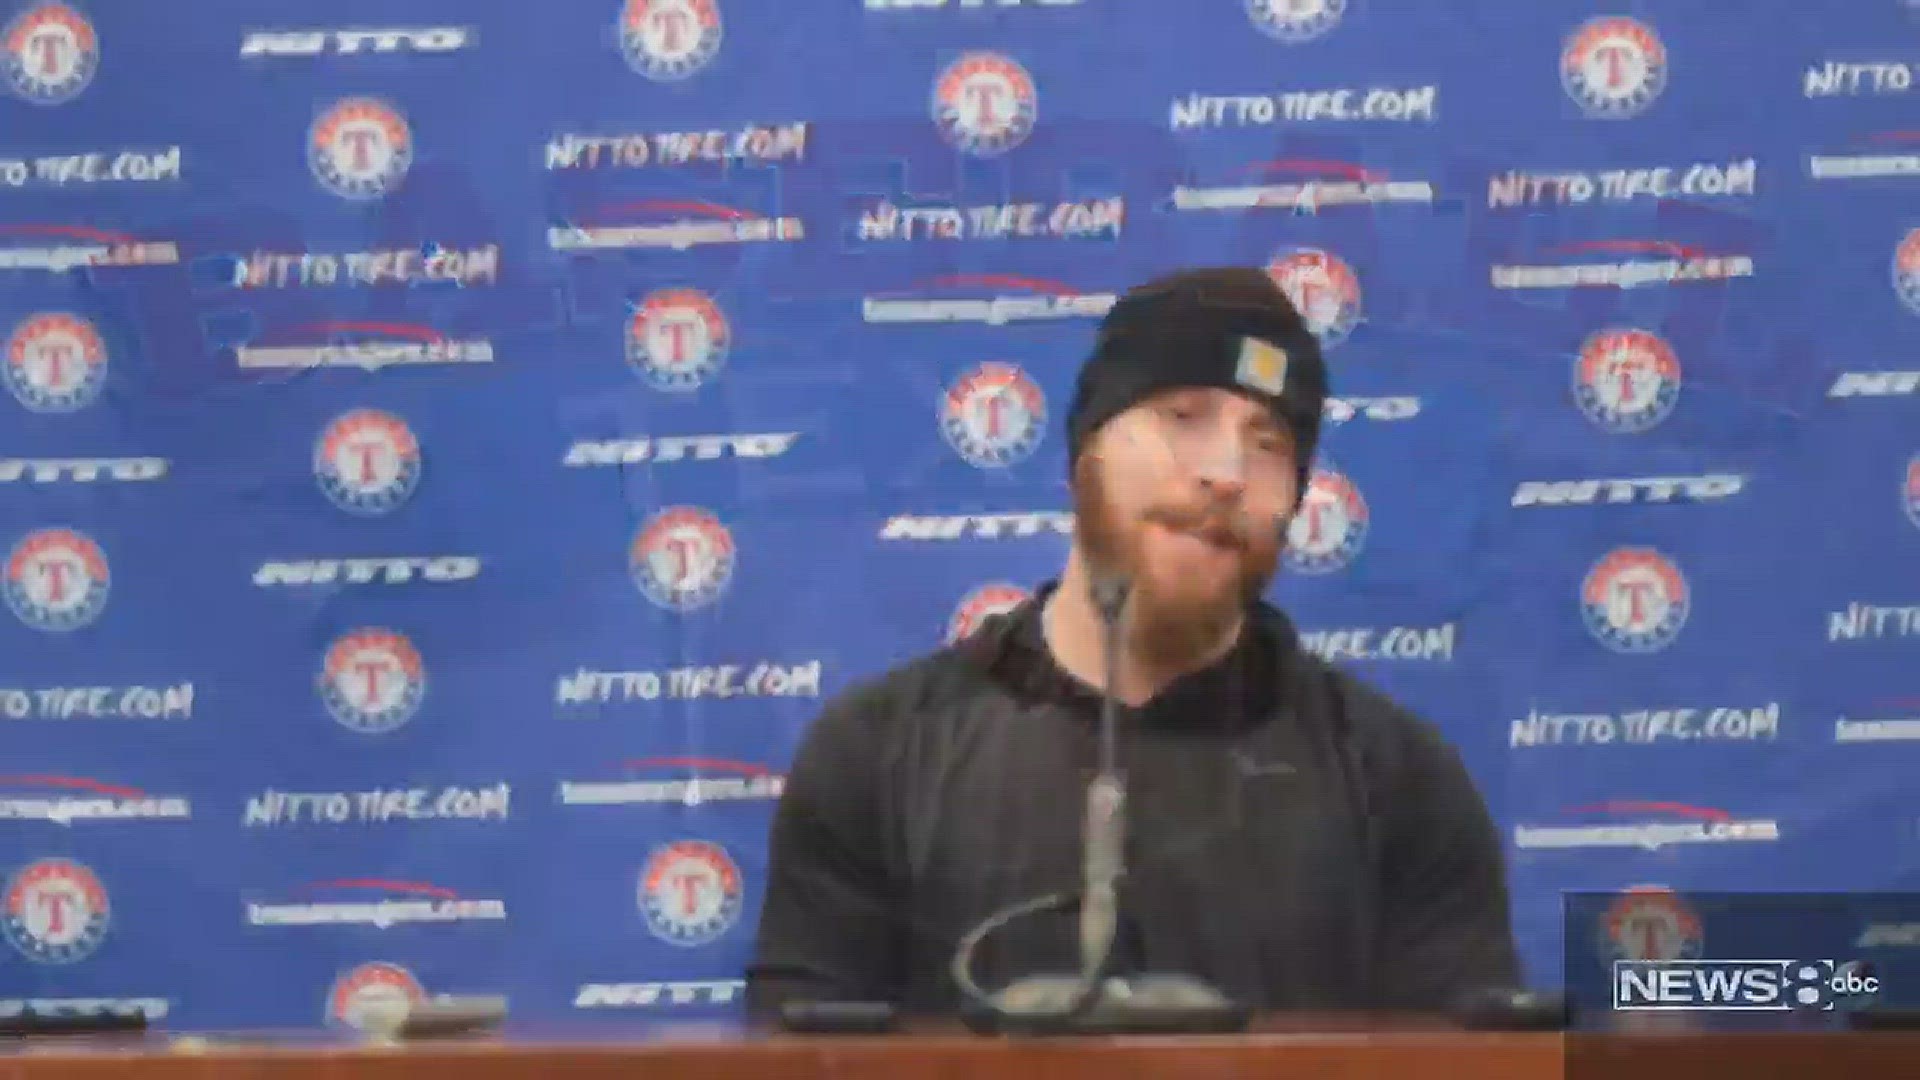 Angels In The Outfield Asking For Help: Josh Hamilton & Baseball's